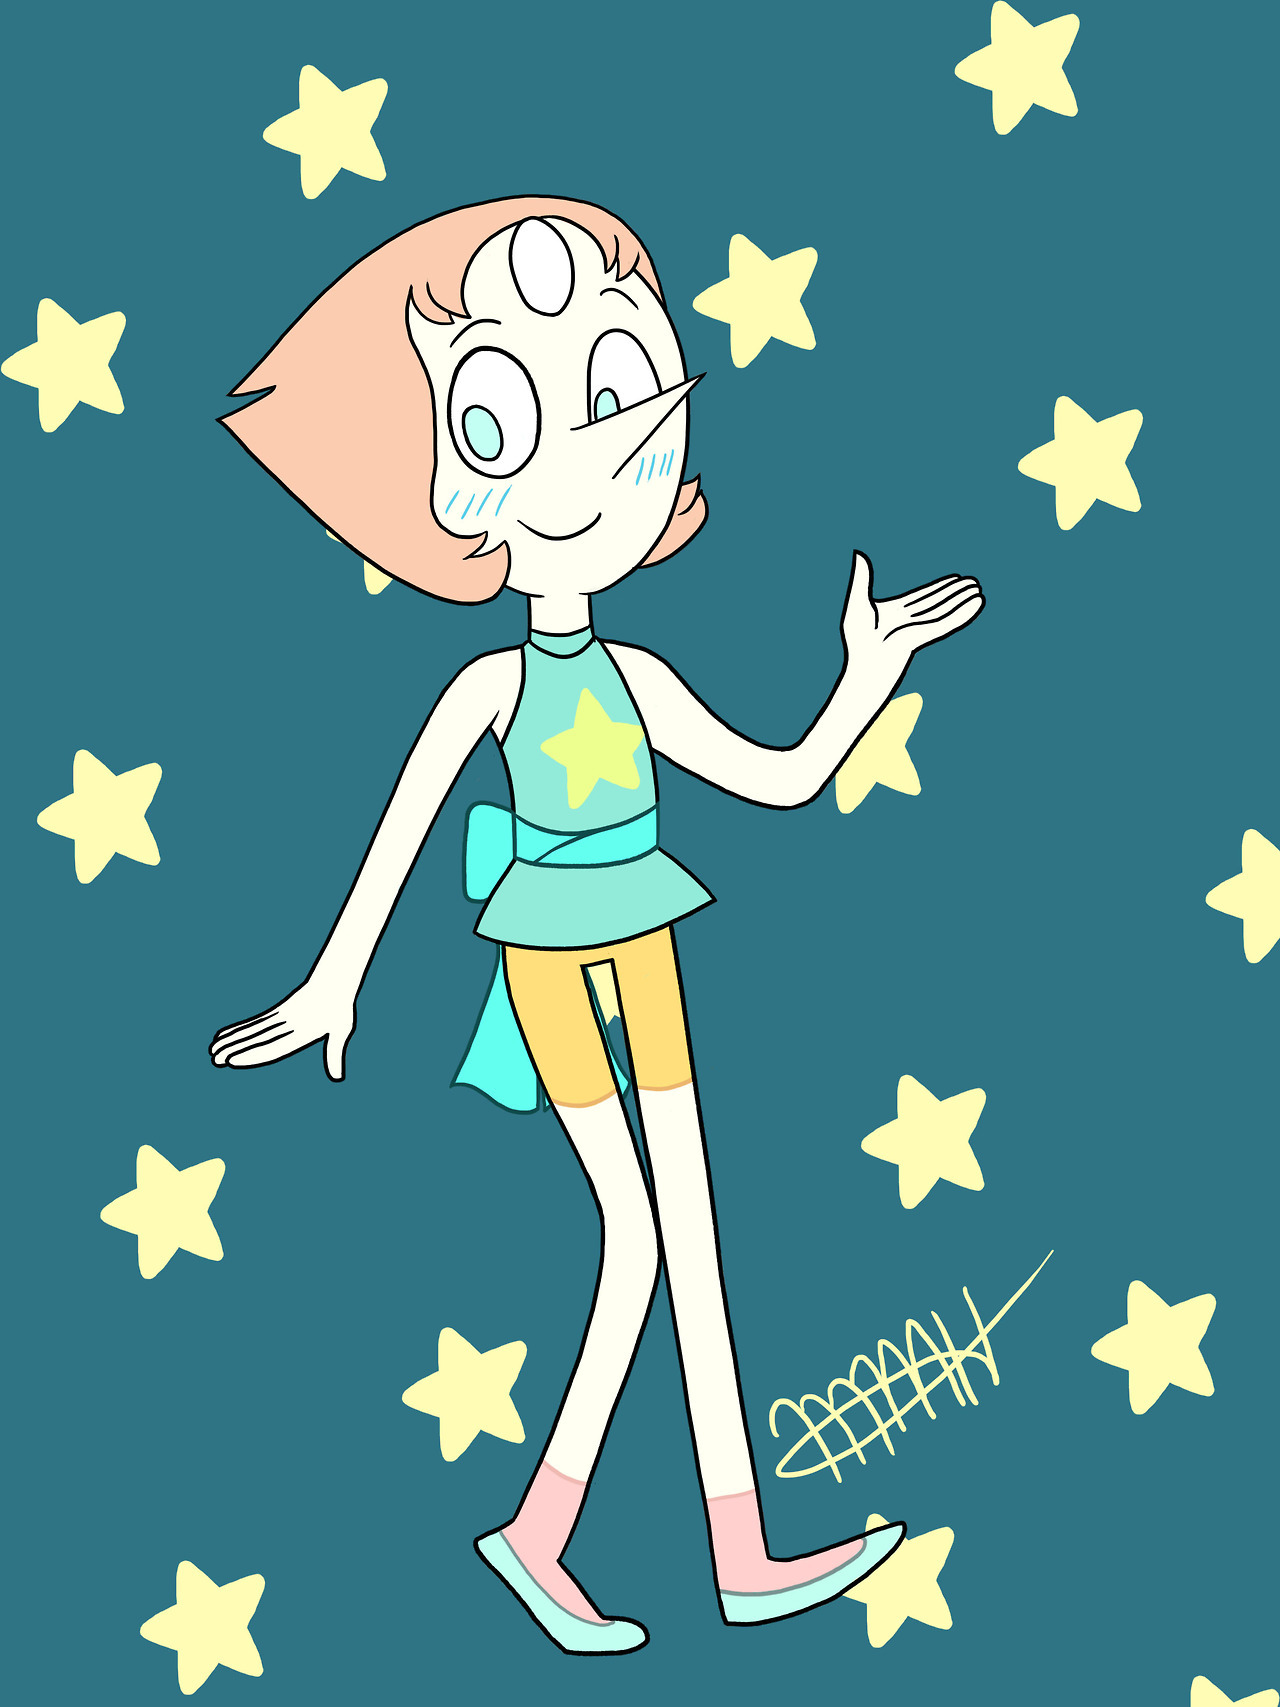 Oh look another Pearl drawing.